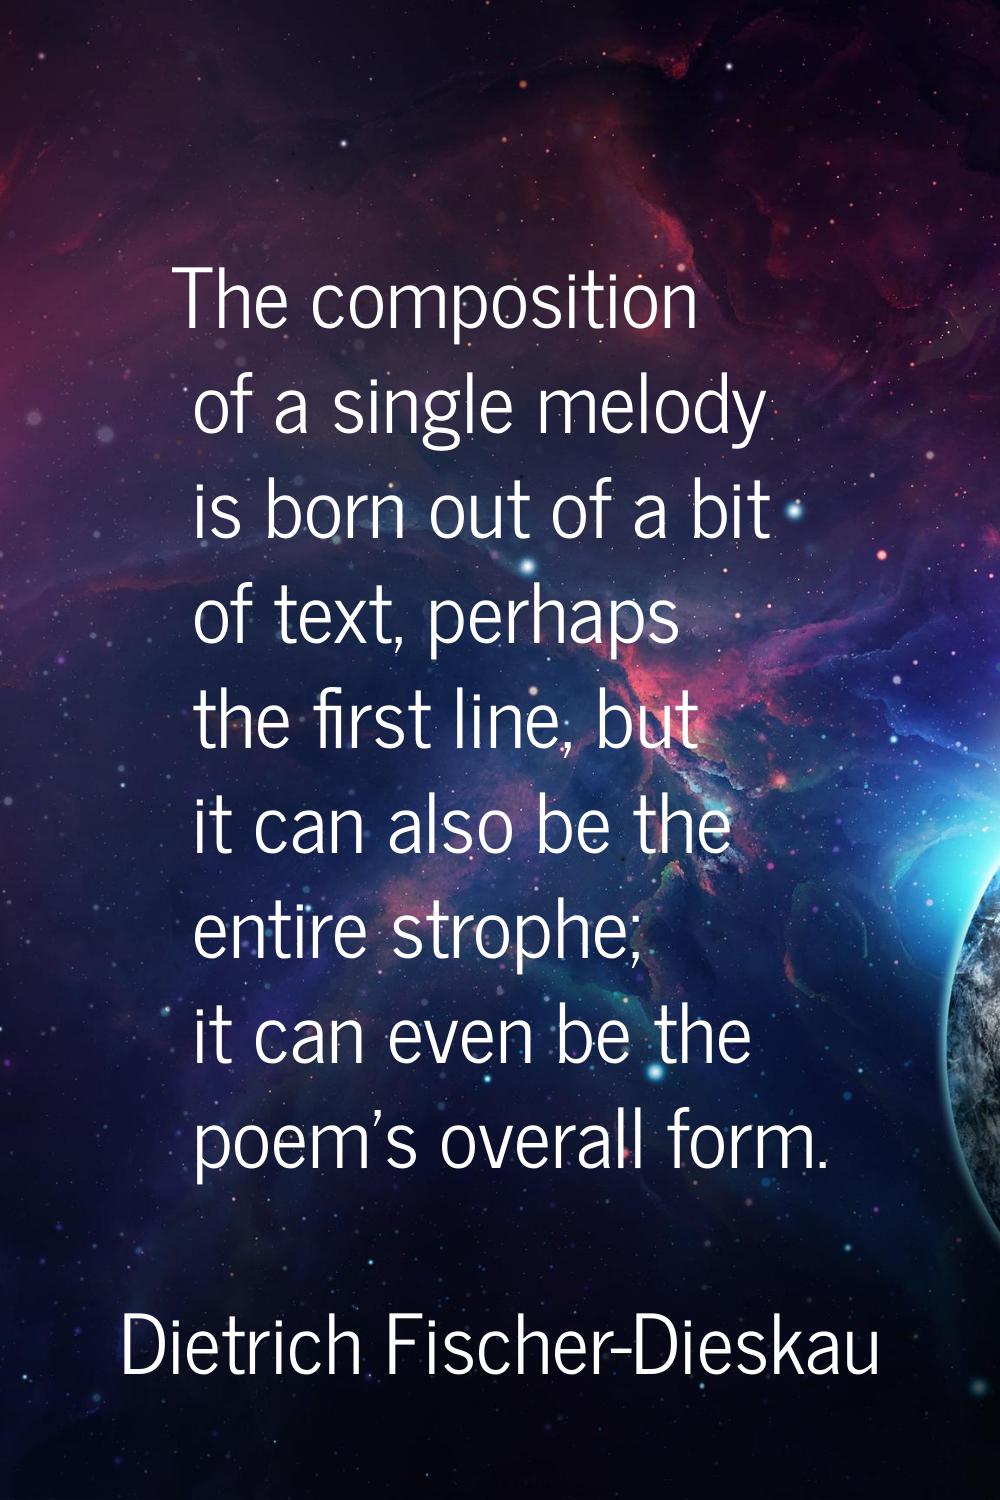 The composition of a single melody is born out of a bit of text, perhaps the first line, but it can